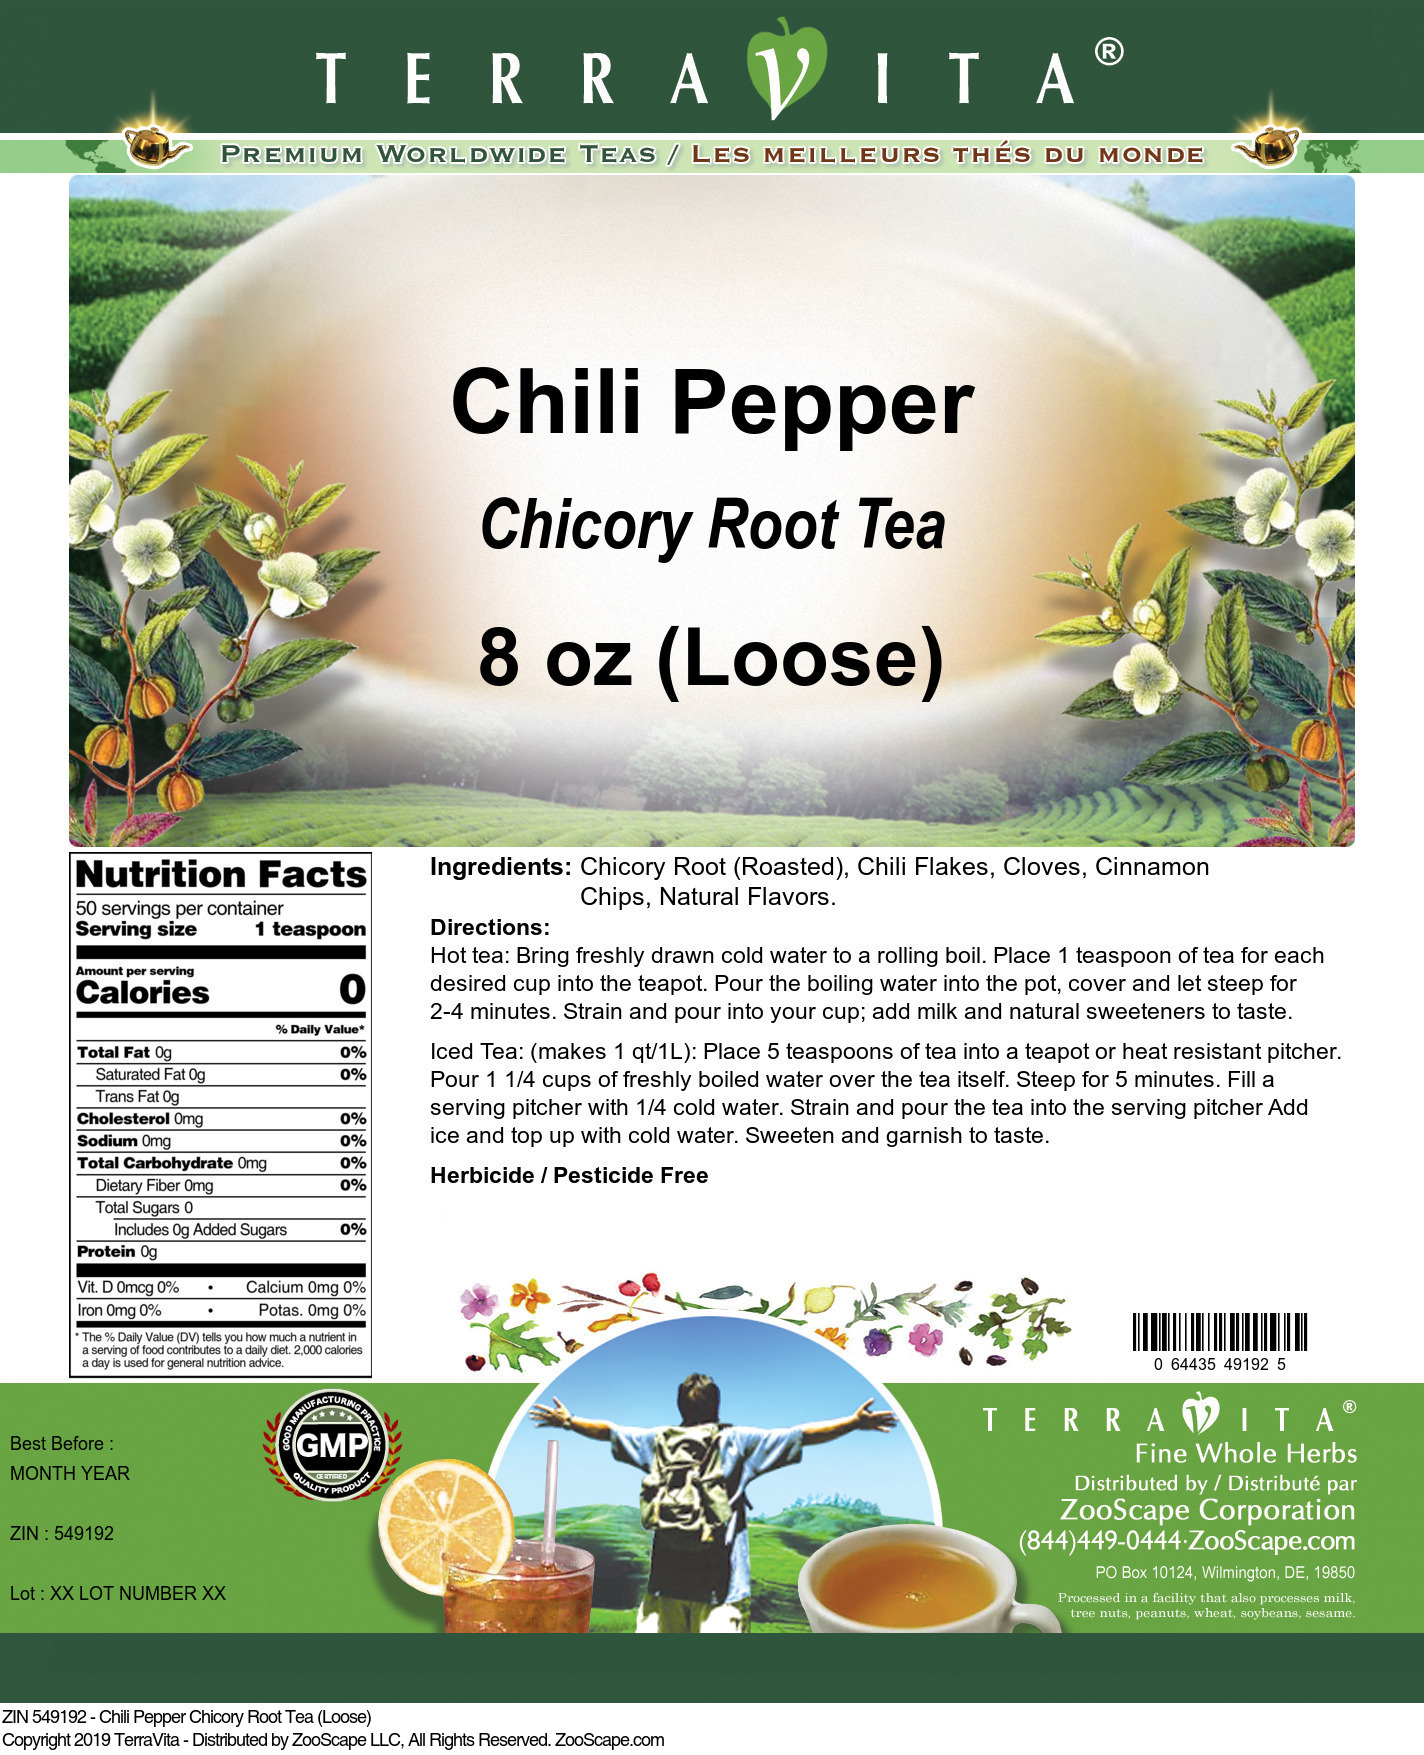 Chili Pepper Chicory Root Tea (Loose) - Label